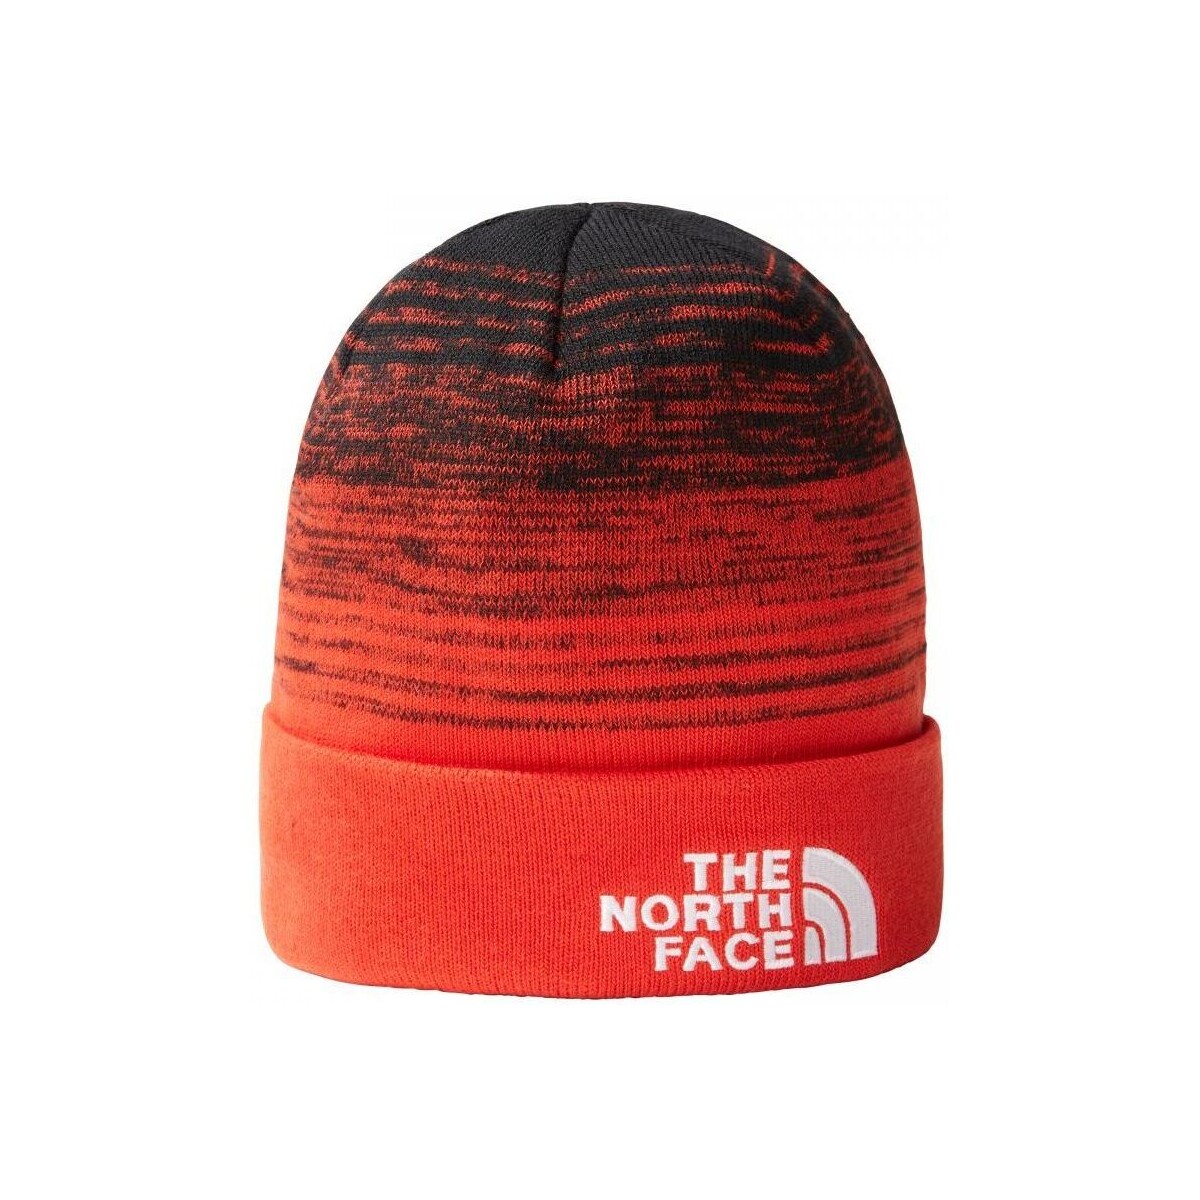 Accessoires Hüte The North Face NF0A3FNTTJ21 - DOCKWKR RCYLD BEANIE-TNF BLACK-FIERY RED Rot